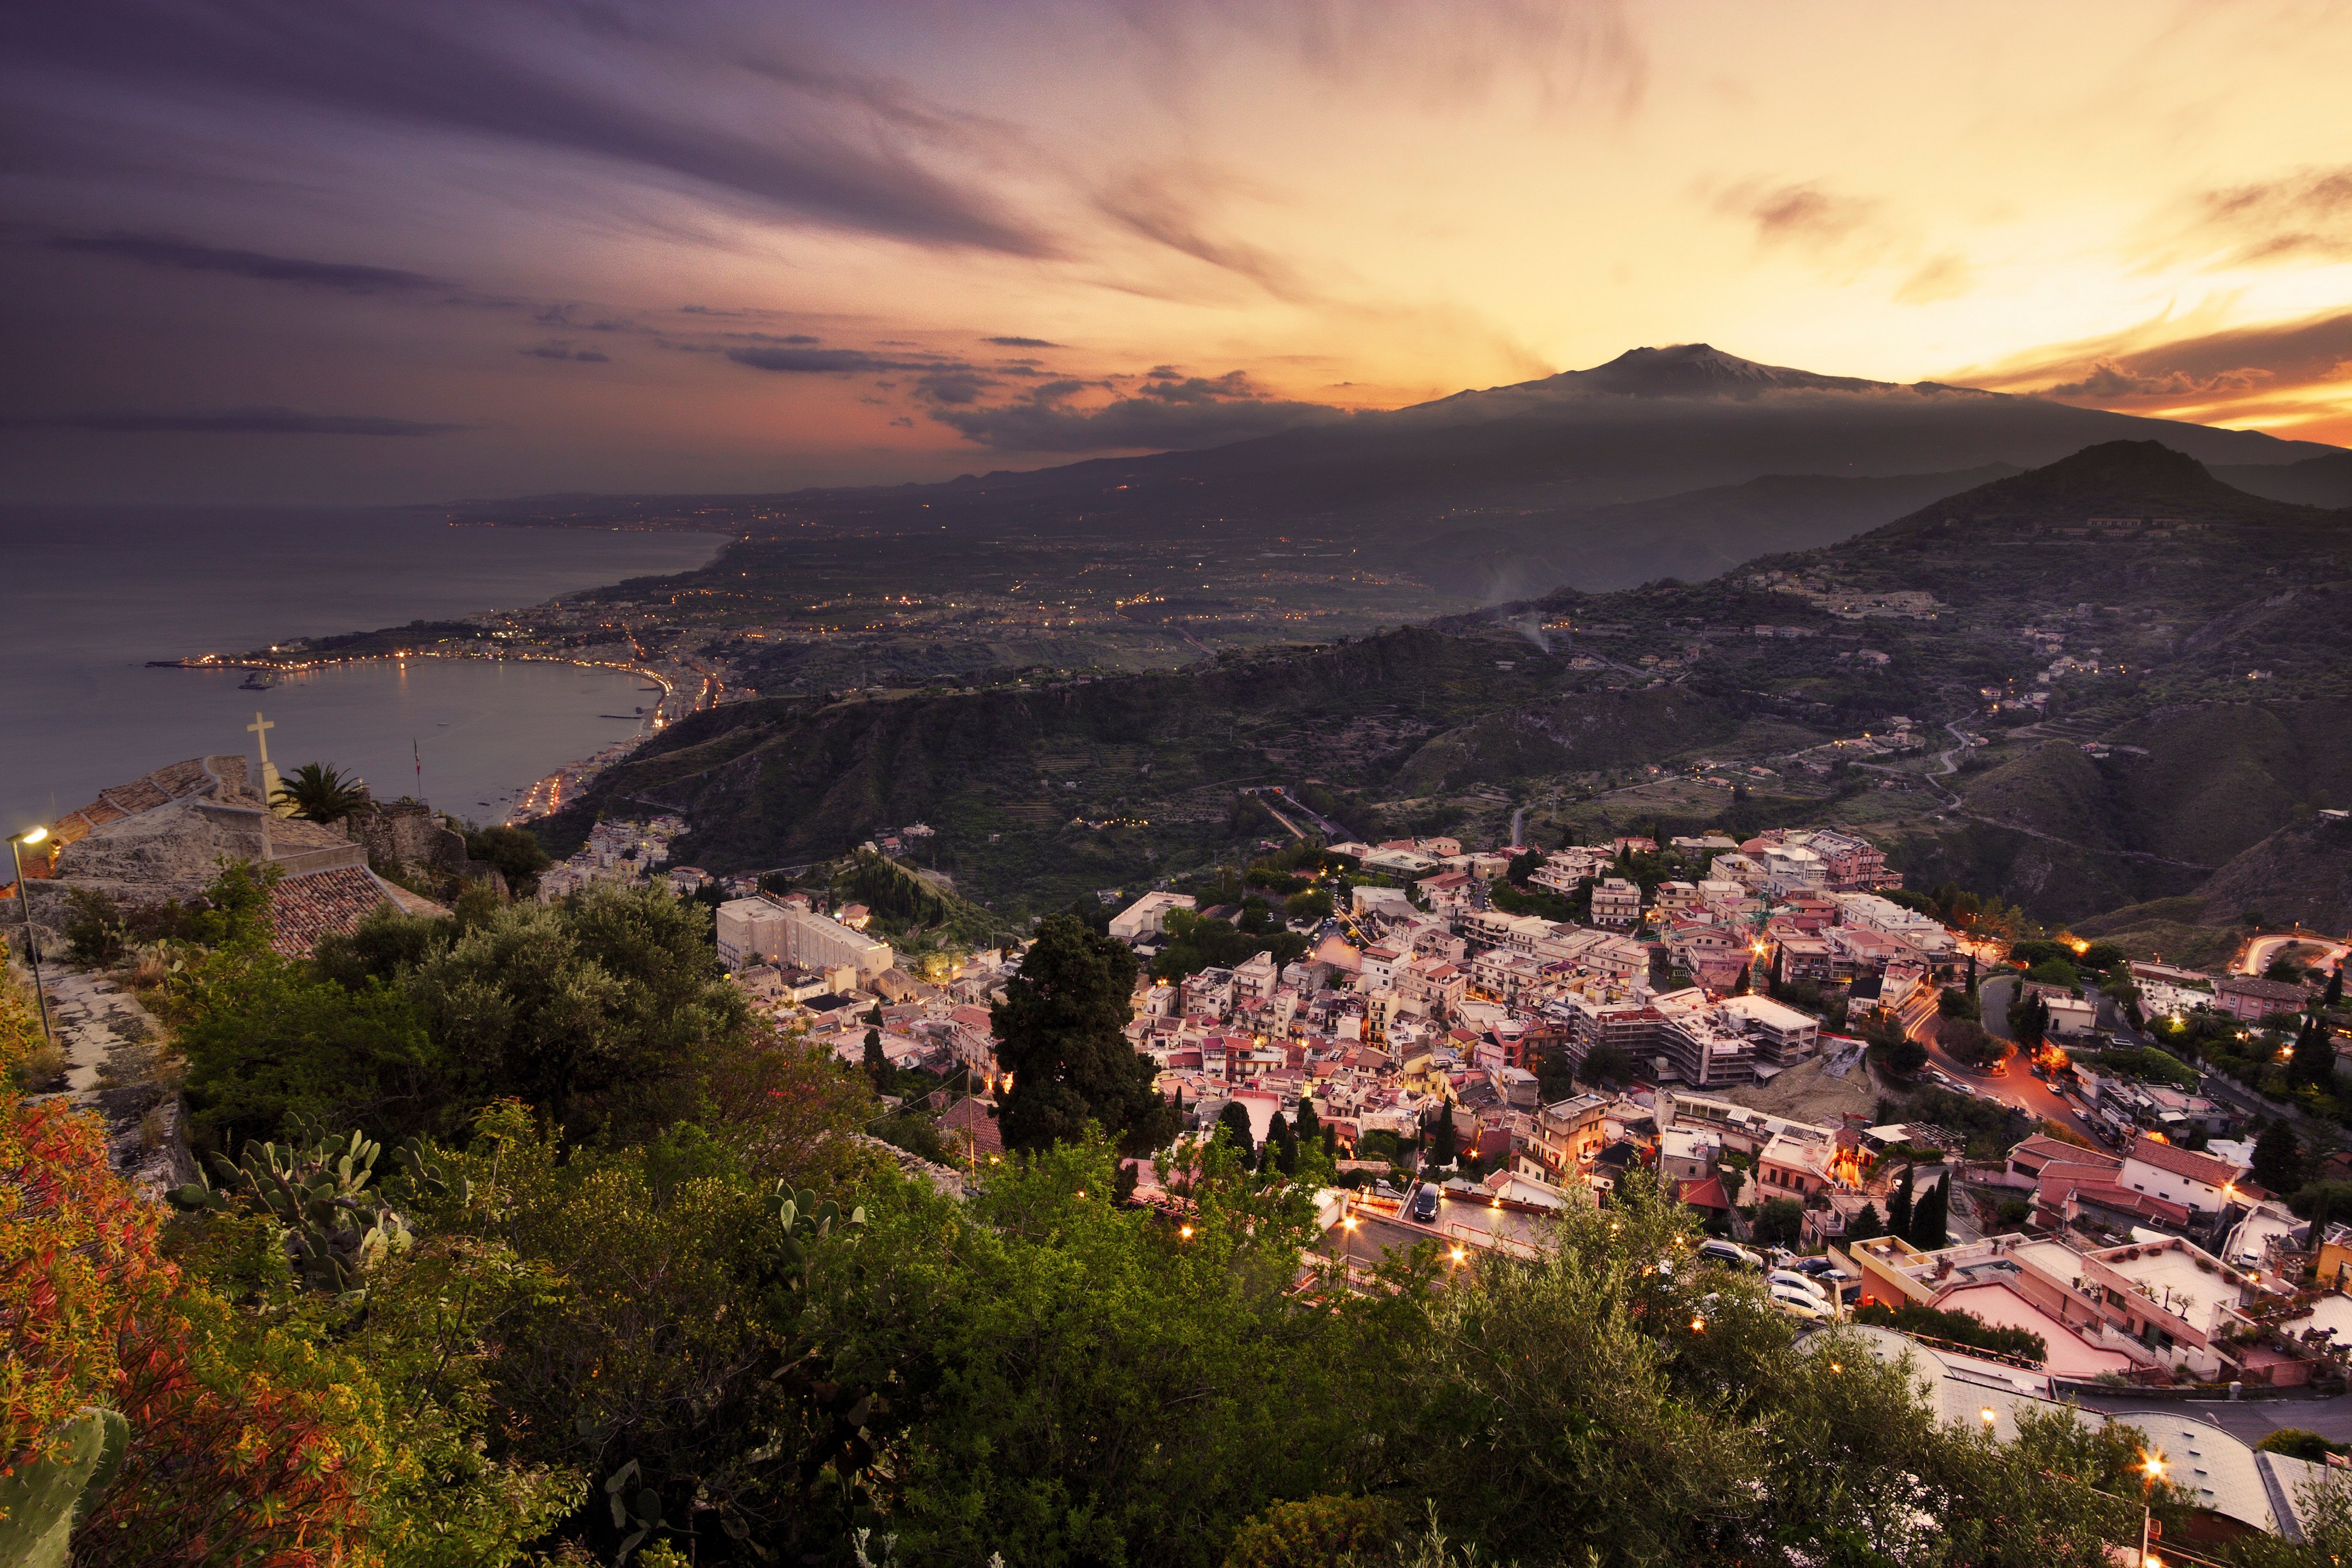 An aerial view of Mount Etna at sunset from Taormina in Sicily, Italy. Photo: Shutterstock